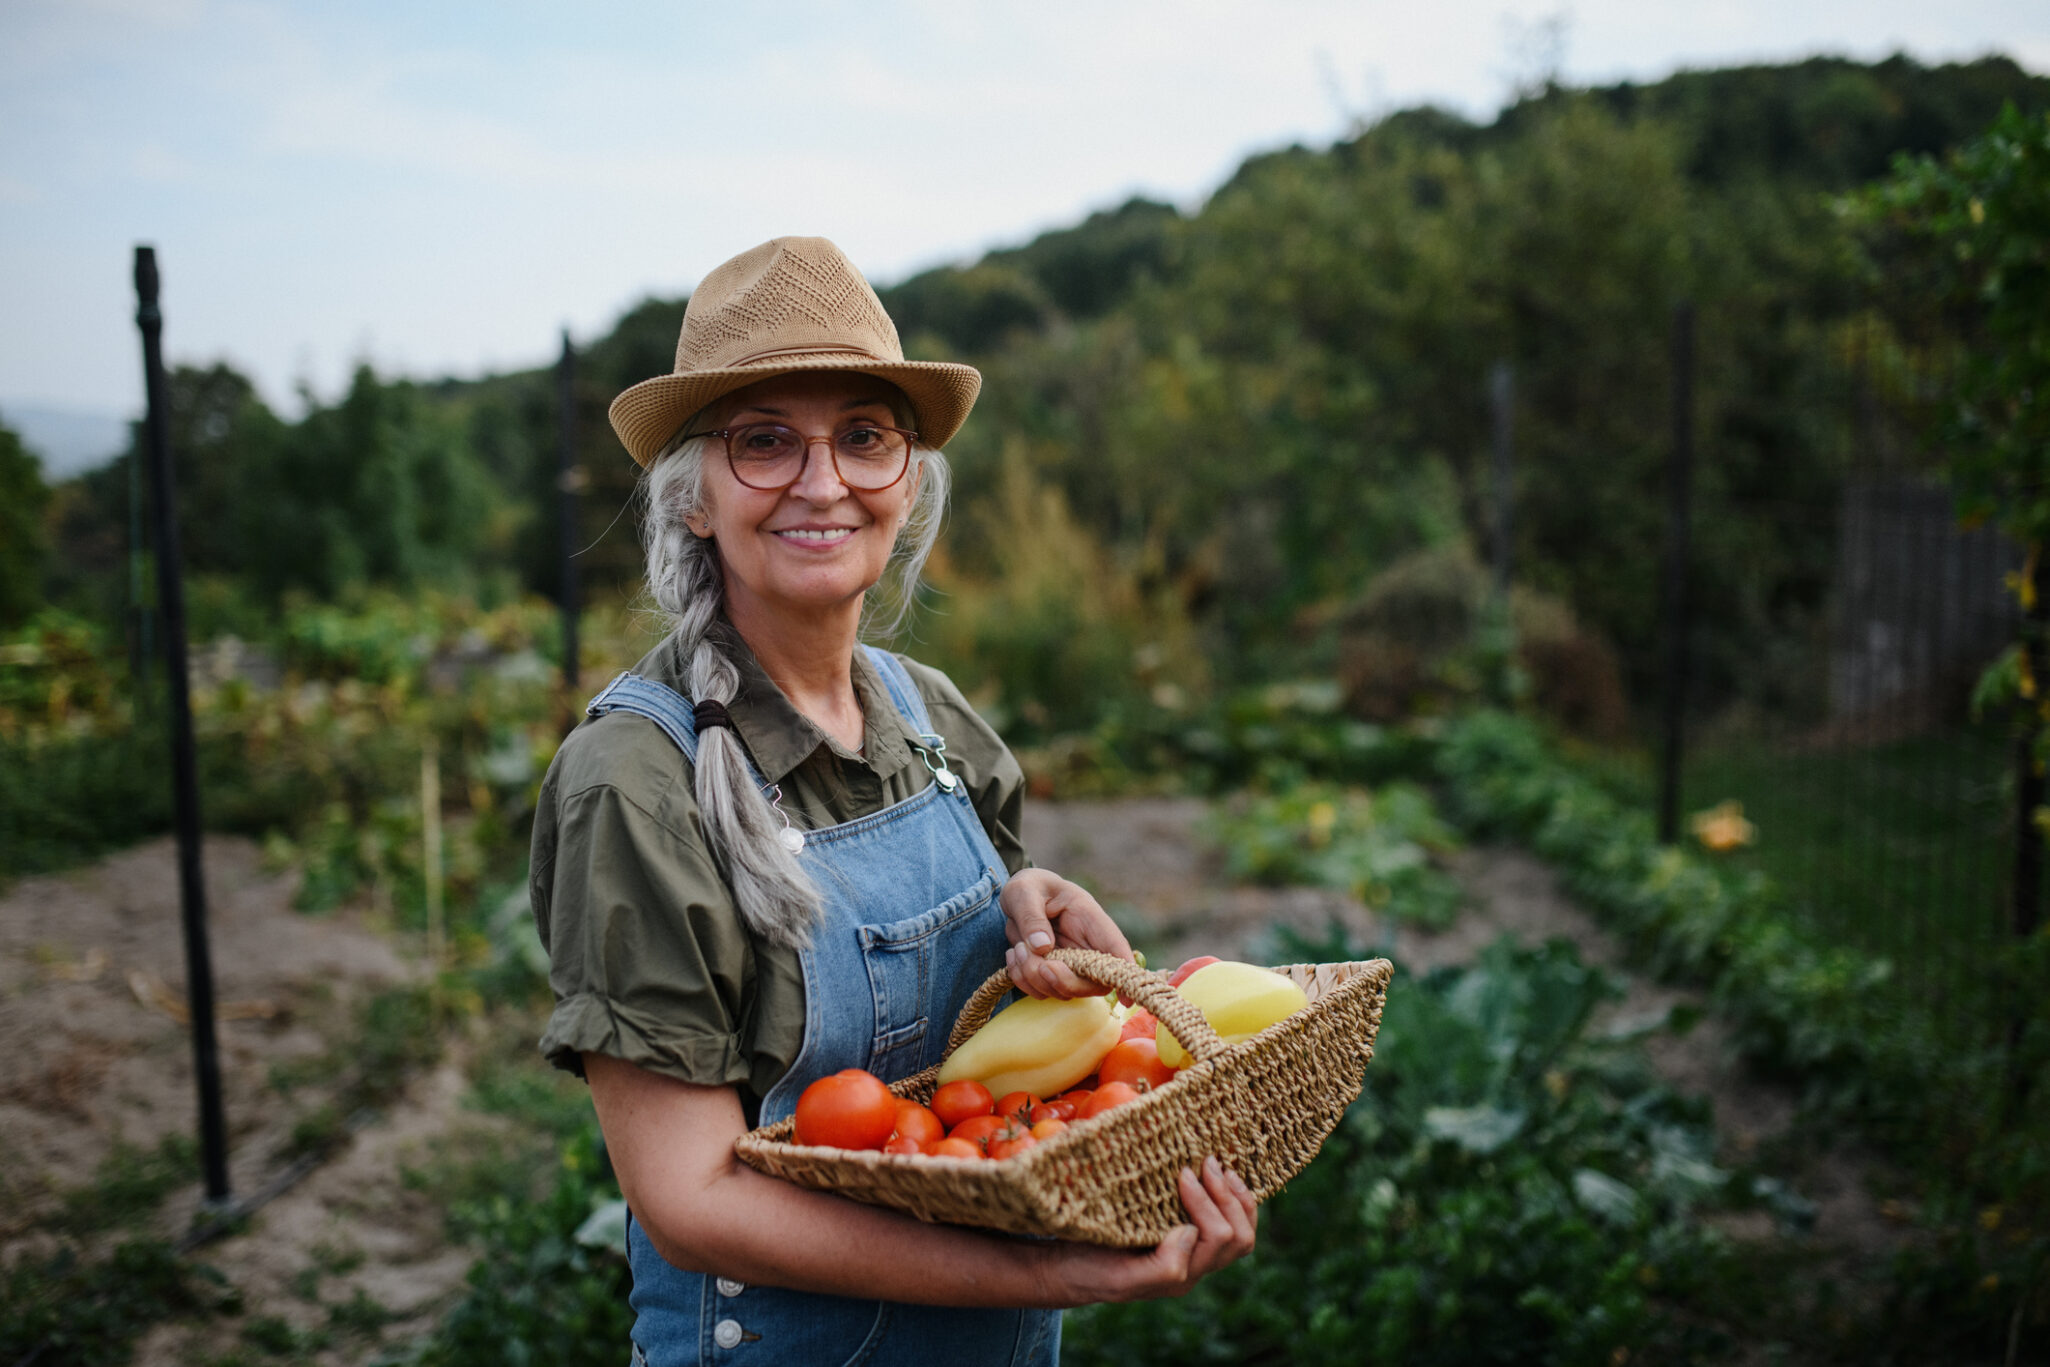 A senior woman in overalls holds a basket of produce in her outdoor garden.